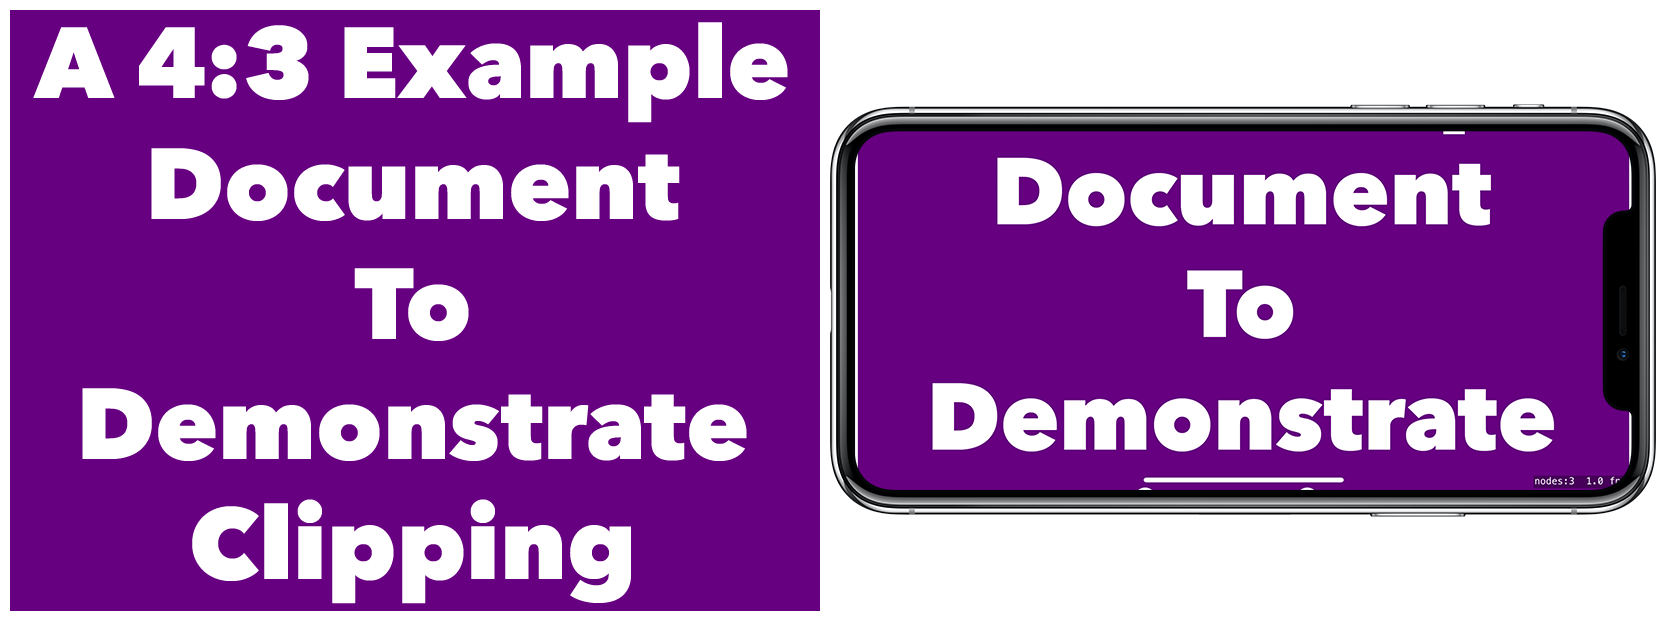 A screenshot of how an asset is clipped on an iPhone. There are two images side by side, the left one is a purple box with the words 'a 4:3 Example Document To Demonstrate Clipping' and the right image is that same purple box within an iPhone X bezel. The top and bottom are cut off within that bezel.